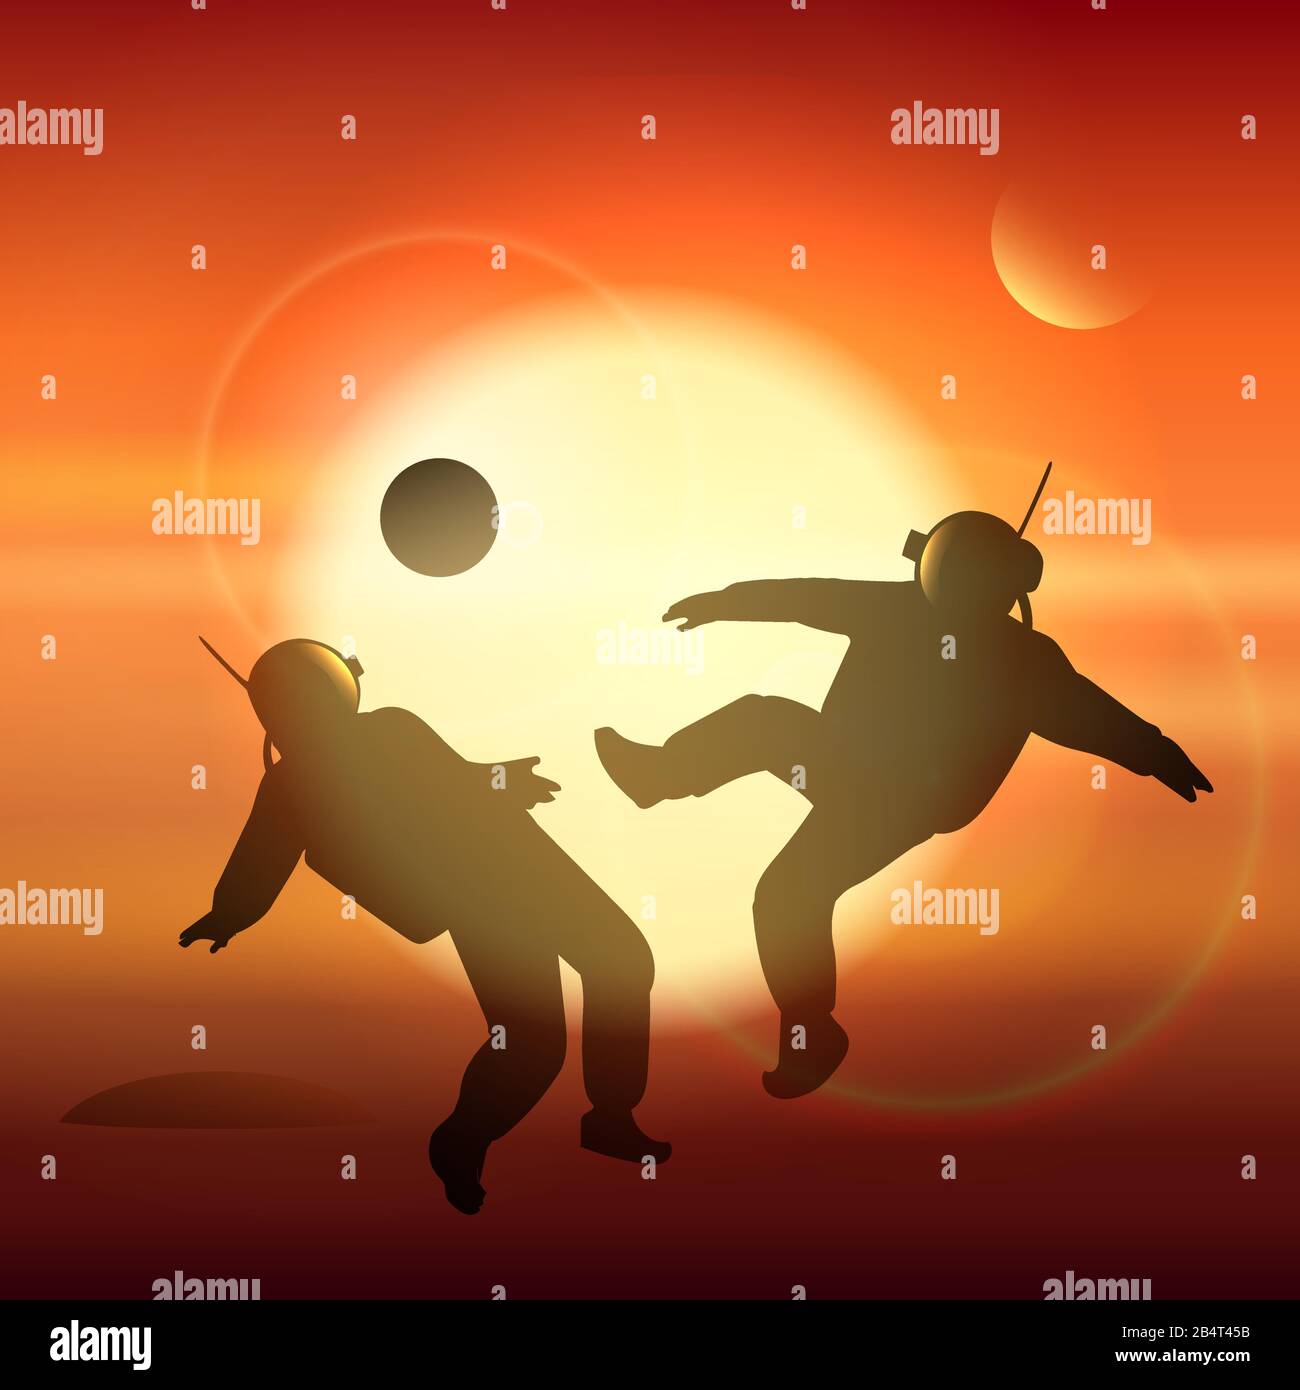 Astronauts playing soccer or football on Martian field. Conquest of Mars theme. Vector illustration. Stock Vector